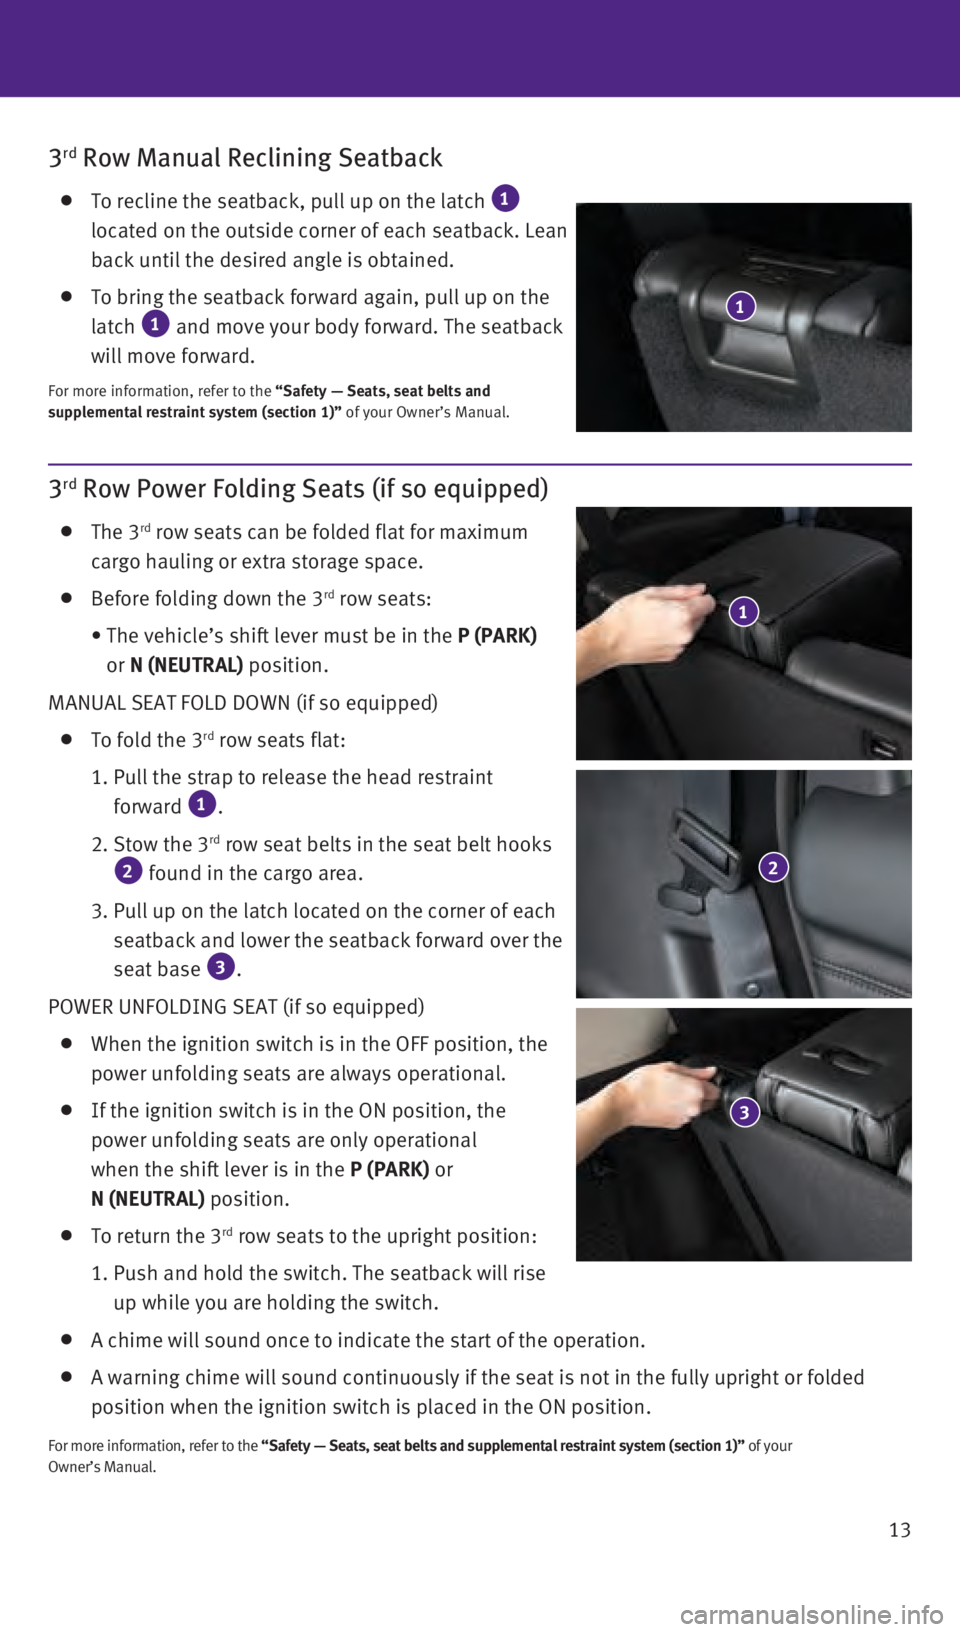 INFINITI QX60 2016  Quick Reference Guide 13
3rd Row Manual Reclining Seatback
    To recline the seatback, pull up on the latch 1 
located on the outside corner of each seatback. Lean 
back until the desired angle is obtained.
    To bring t